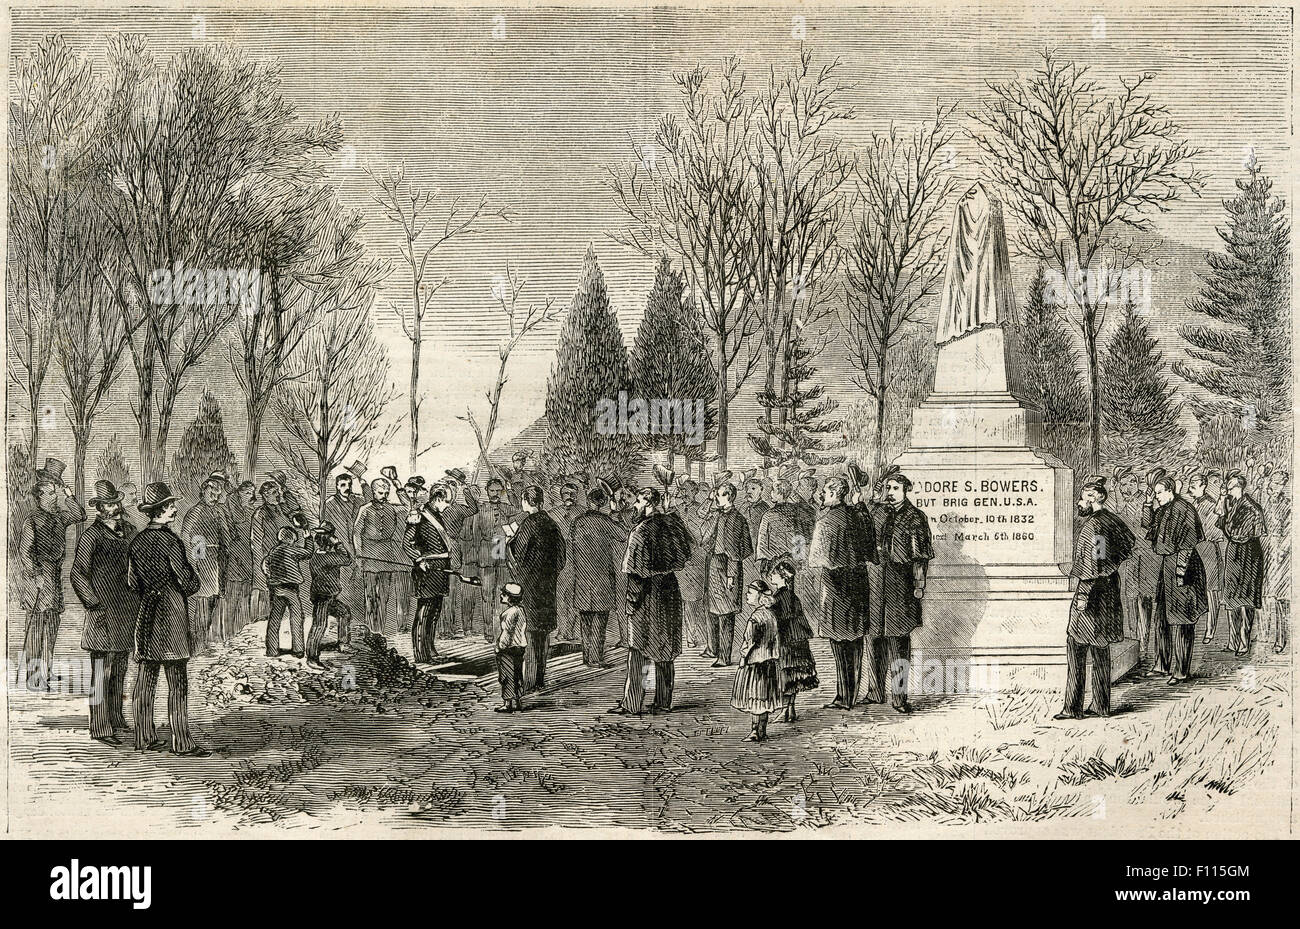 Antique 1872 engraving from Harper's Weekly, The Burial of the Late General Anderson at the West Point Cemetery, USMA. Robert Anderson (1805-1871) was a United States Army officer during the American Civil War. To many, he was a hero who defied the Confederacy and upheld Union honor in the first battle of the American Civil War at Fort Sumter in April 1861. Stock Photo